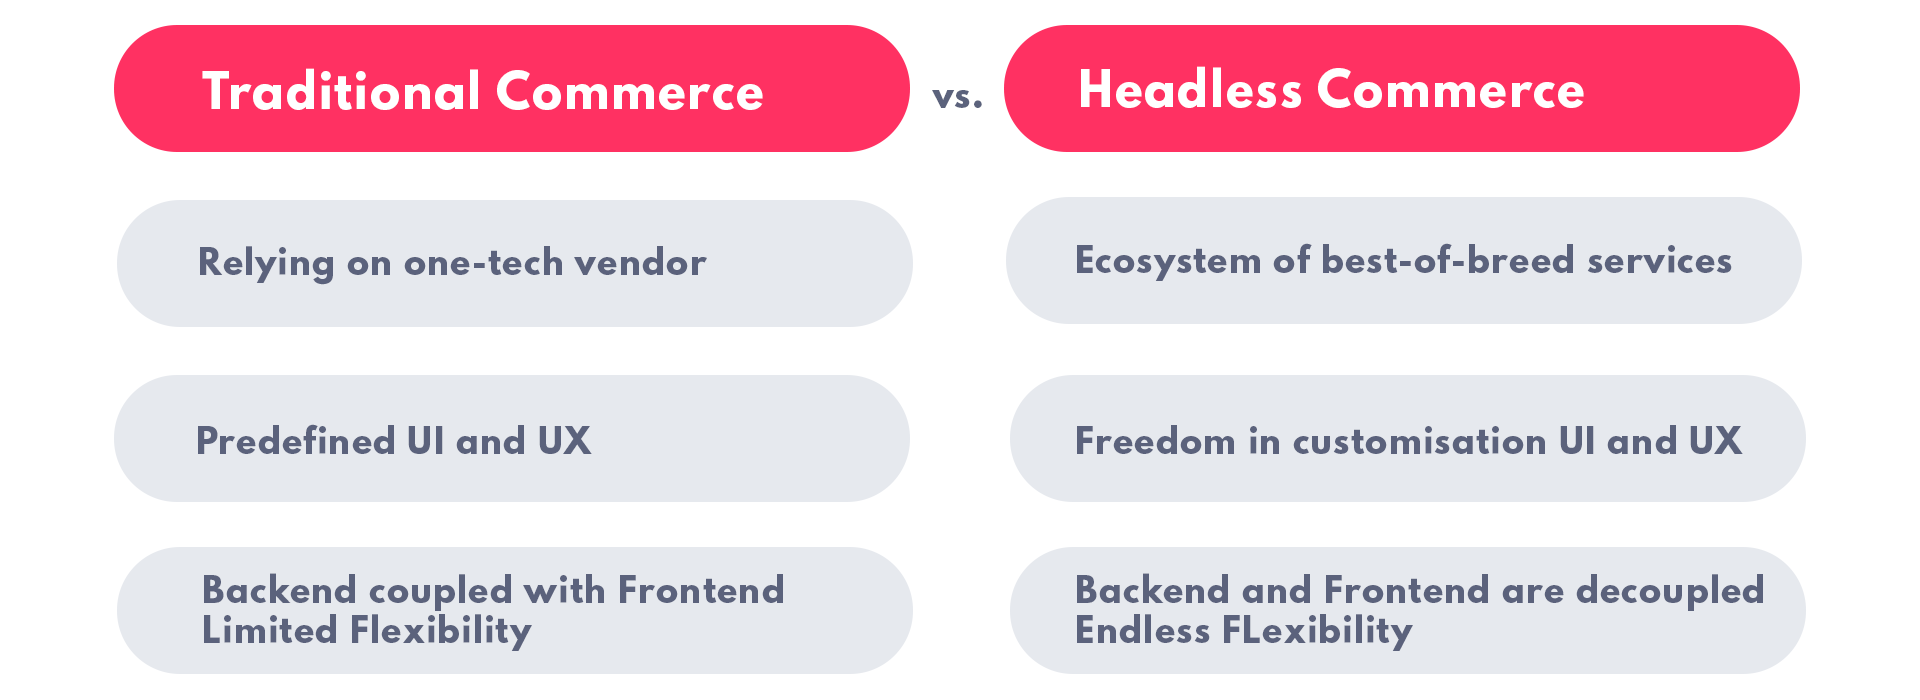 Headless Commerce Compared to Traditional Commerce